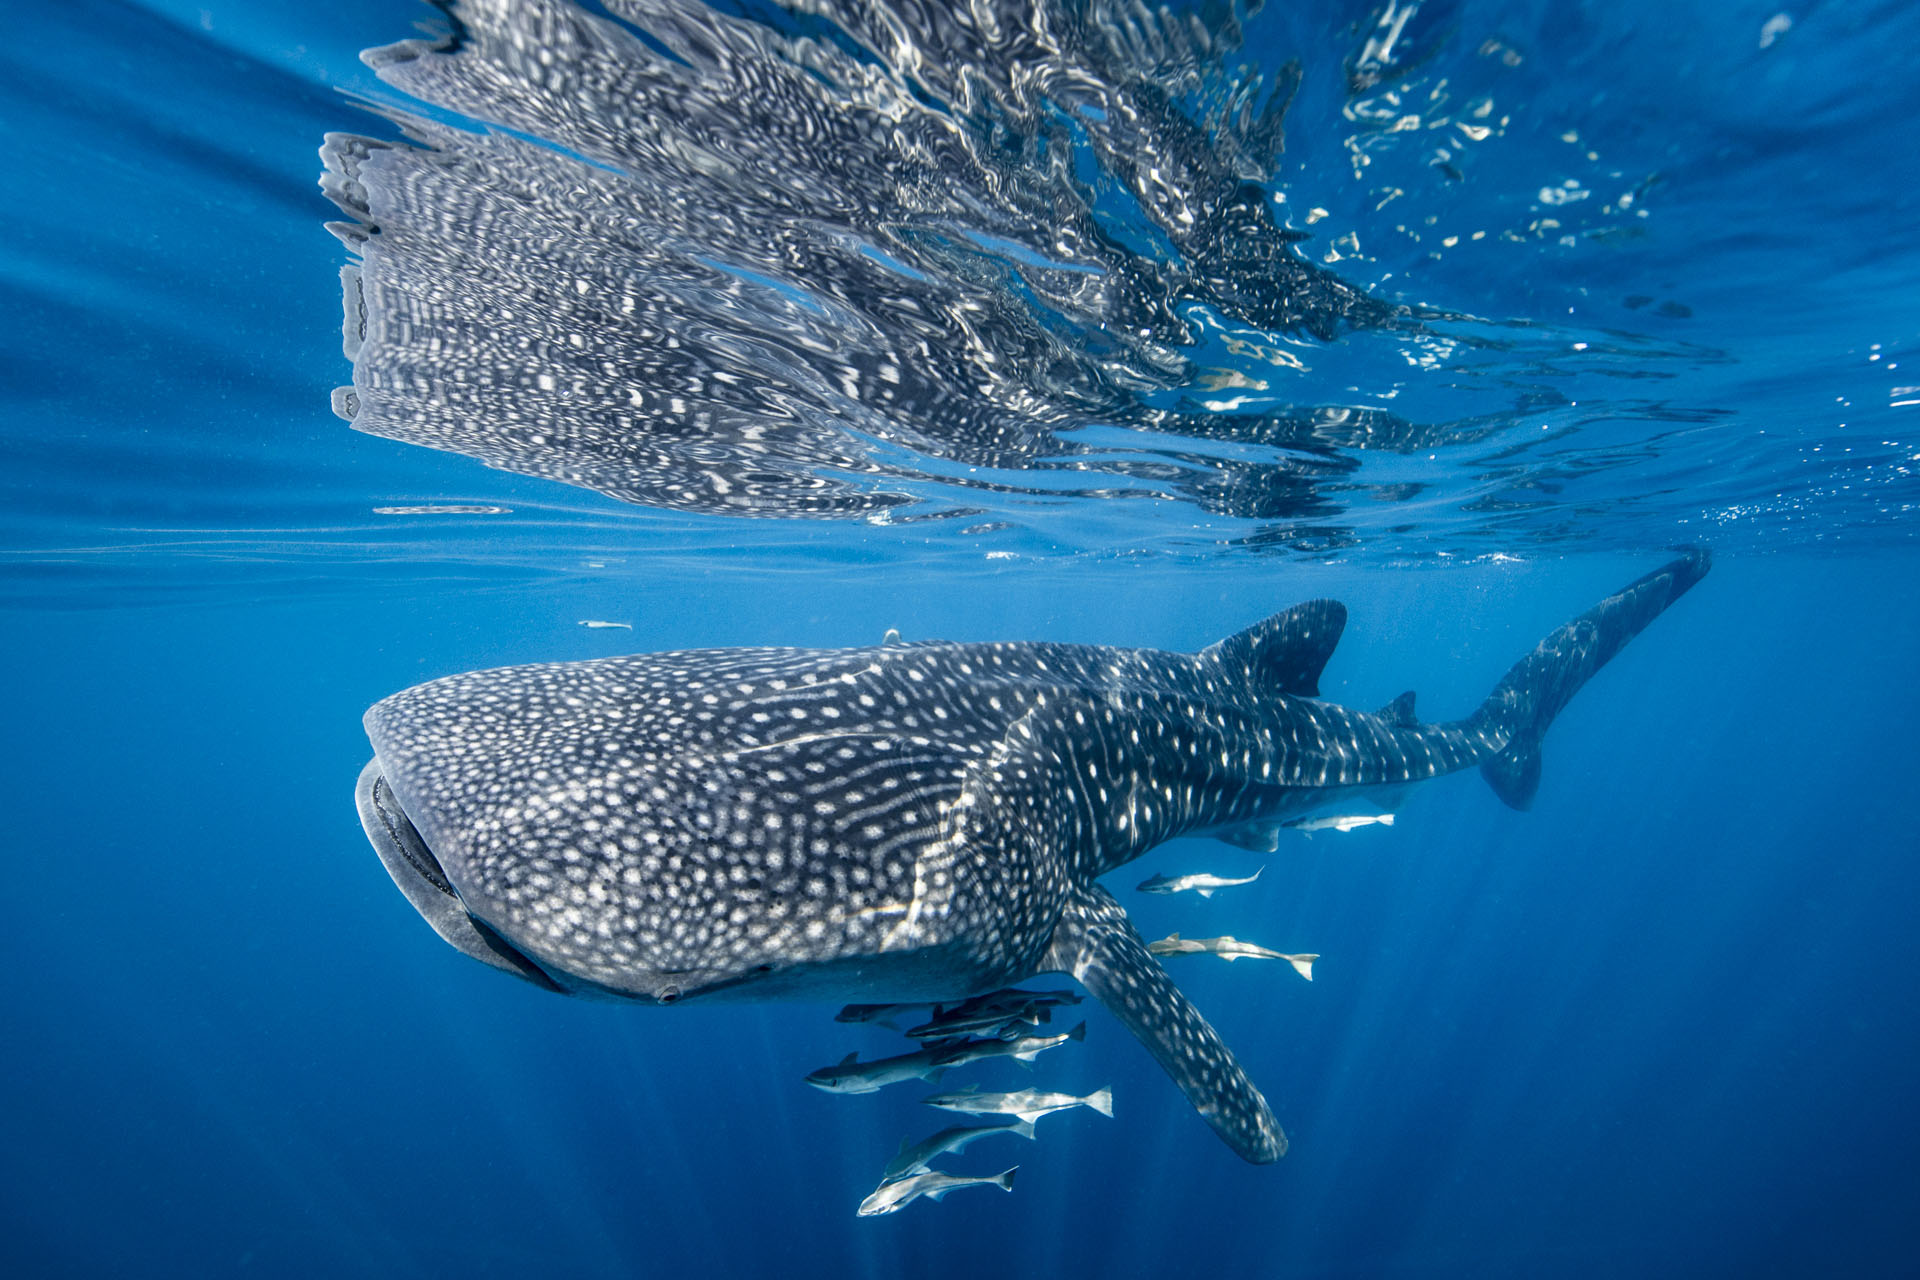 whale shark swimming in the ocean with fish next to it